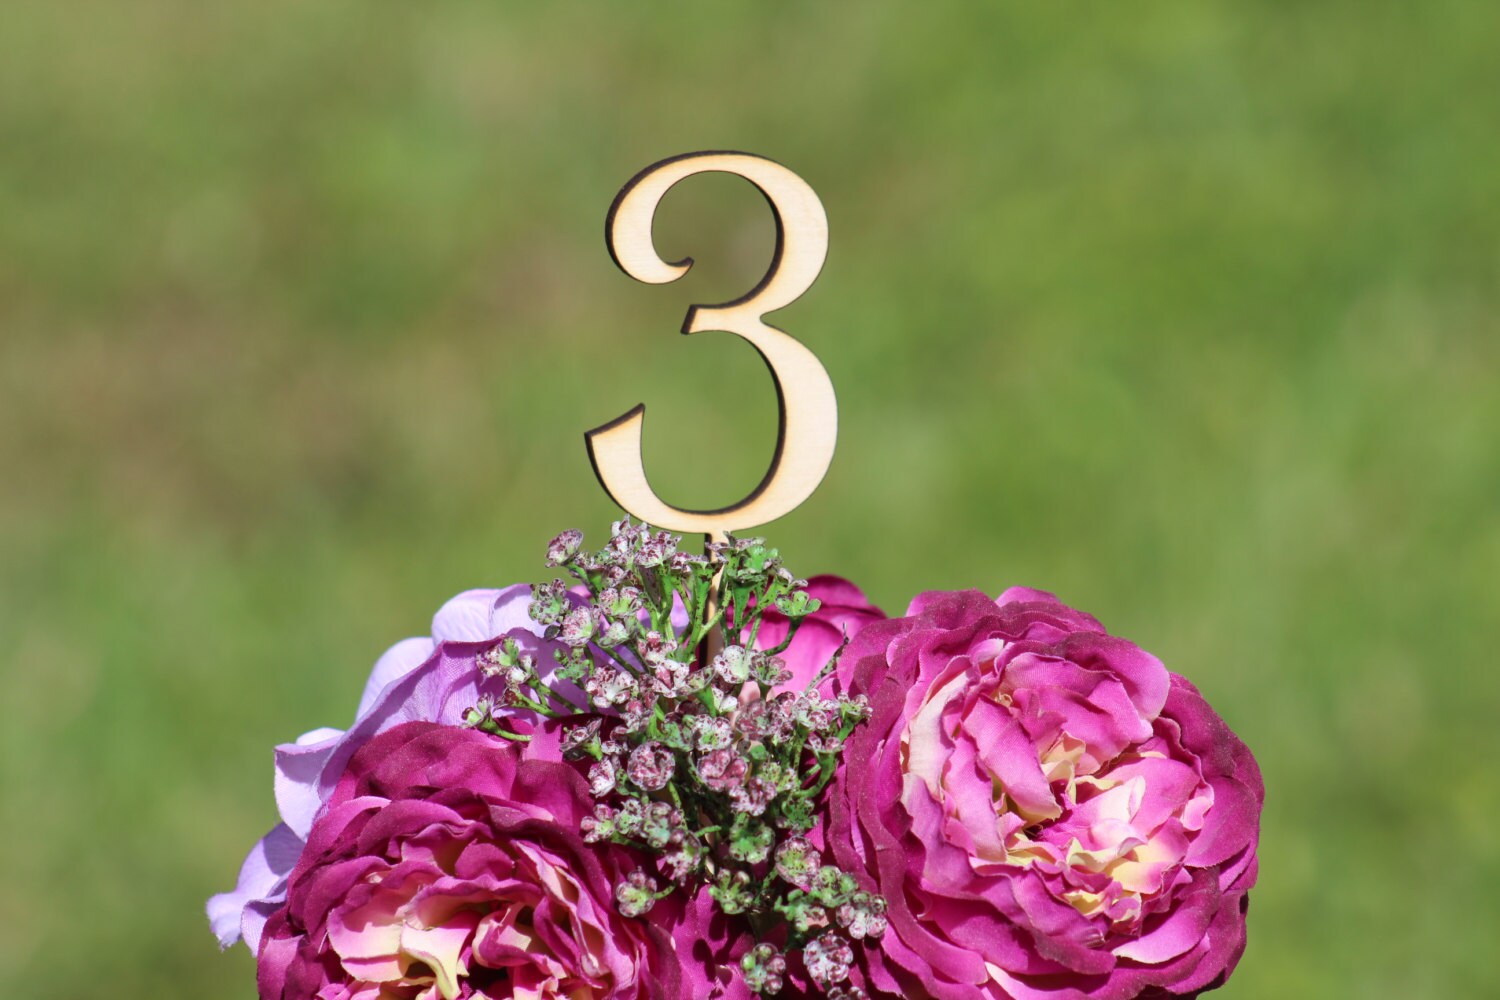 Wooden Rustic Table number - Beach Rustic Country Chic Wedding